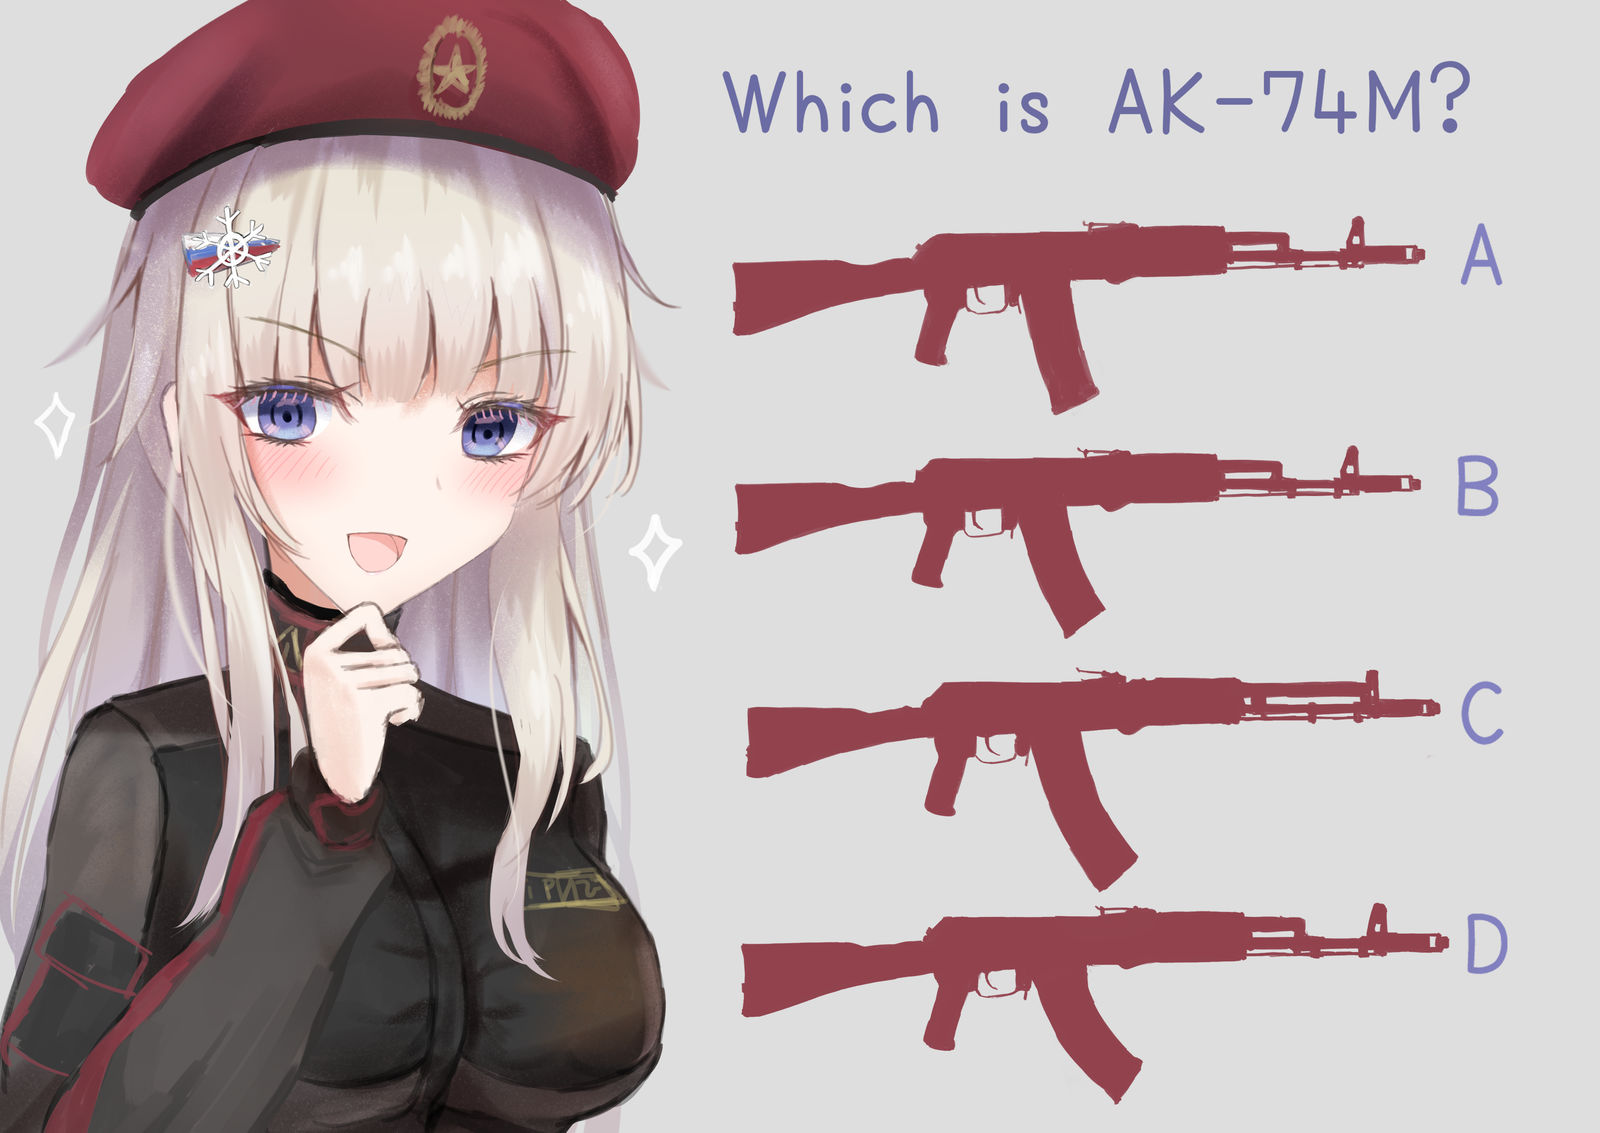 Which is AK-74M?